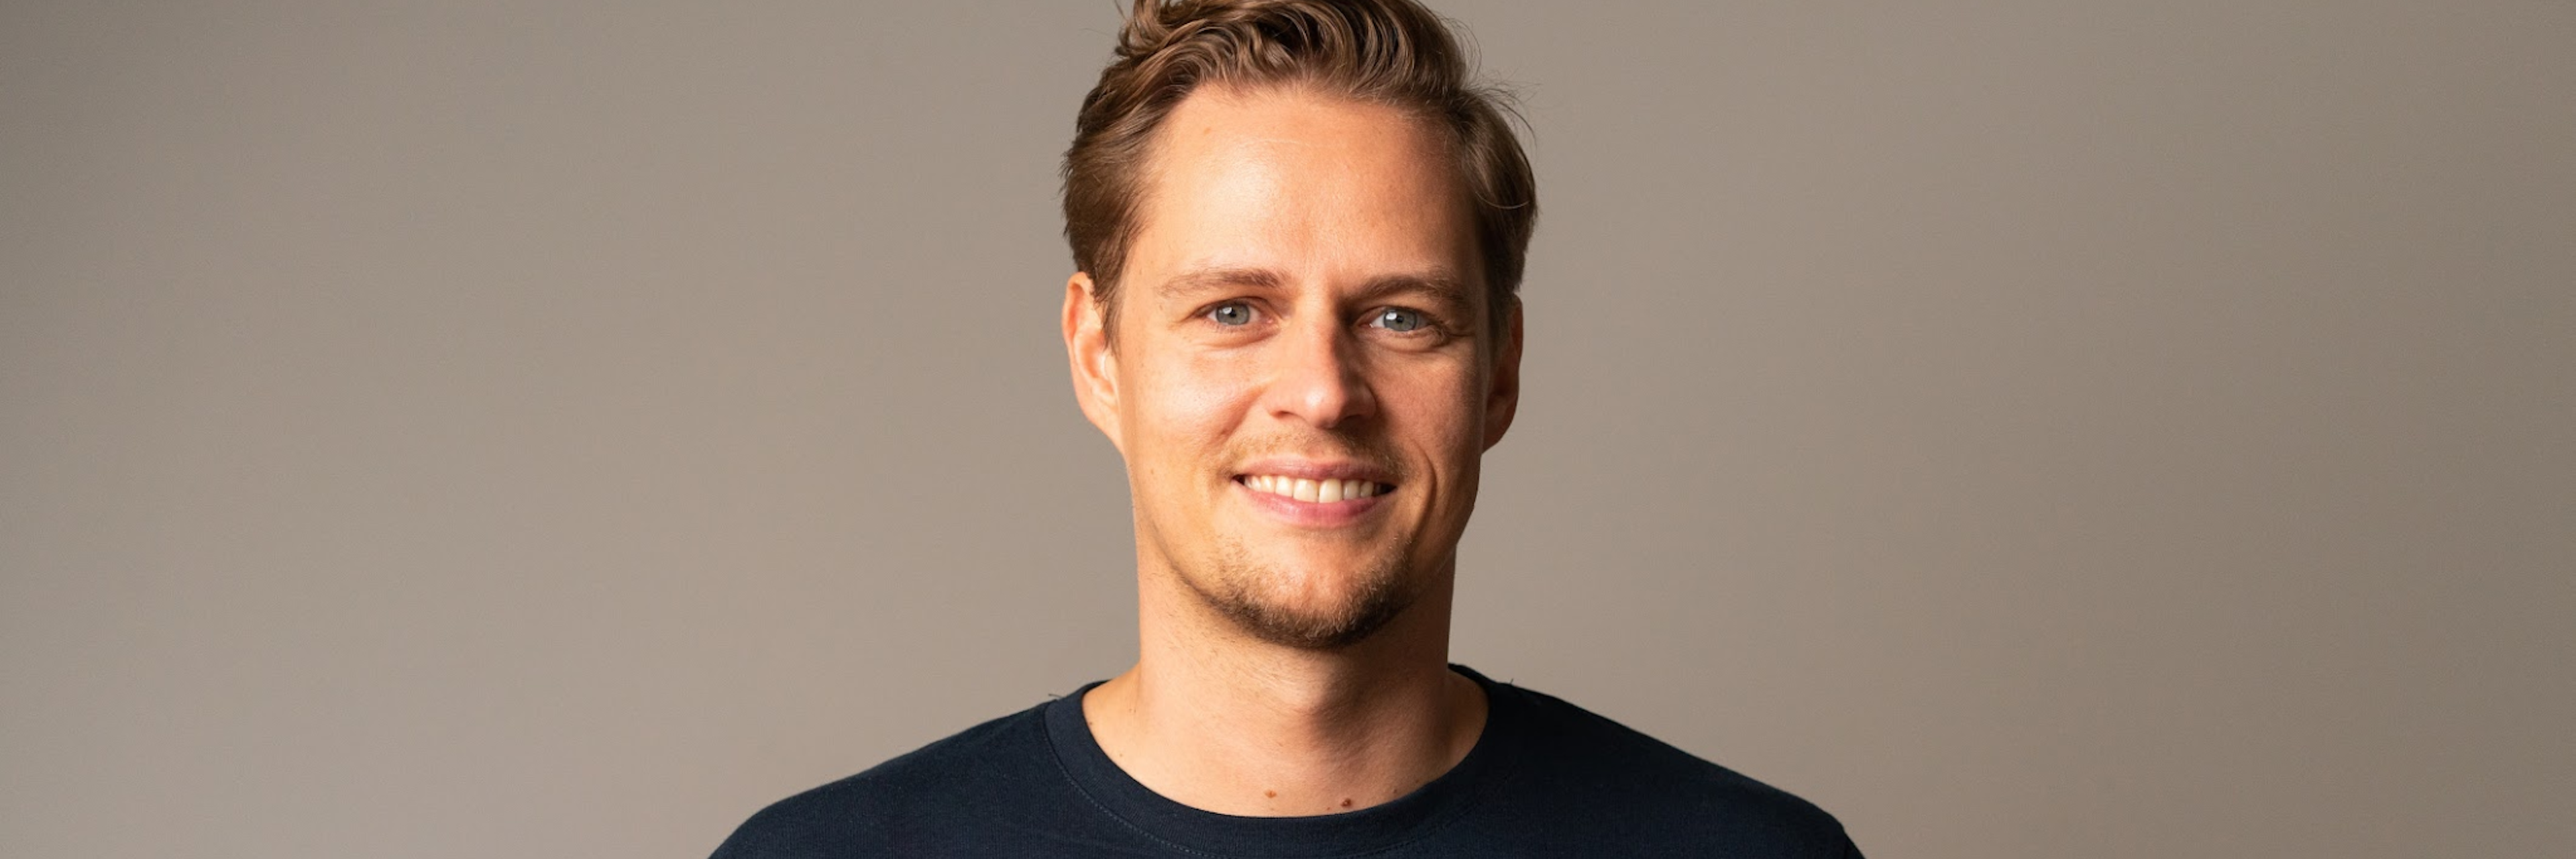 Fintech Upvest's founder and CEO Martin Kassing